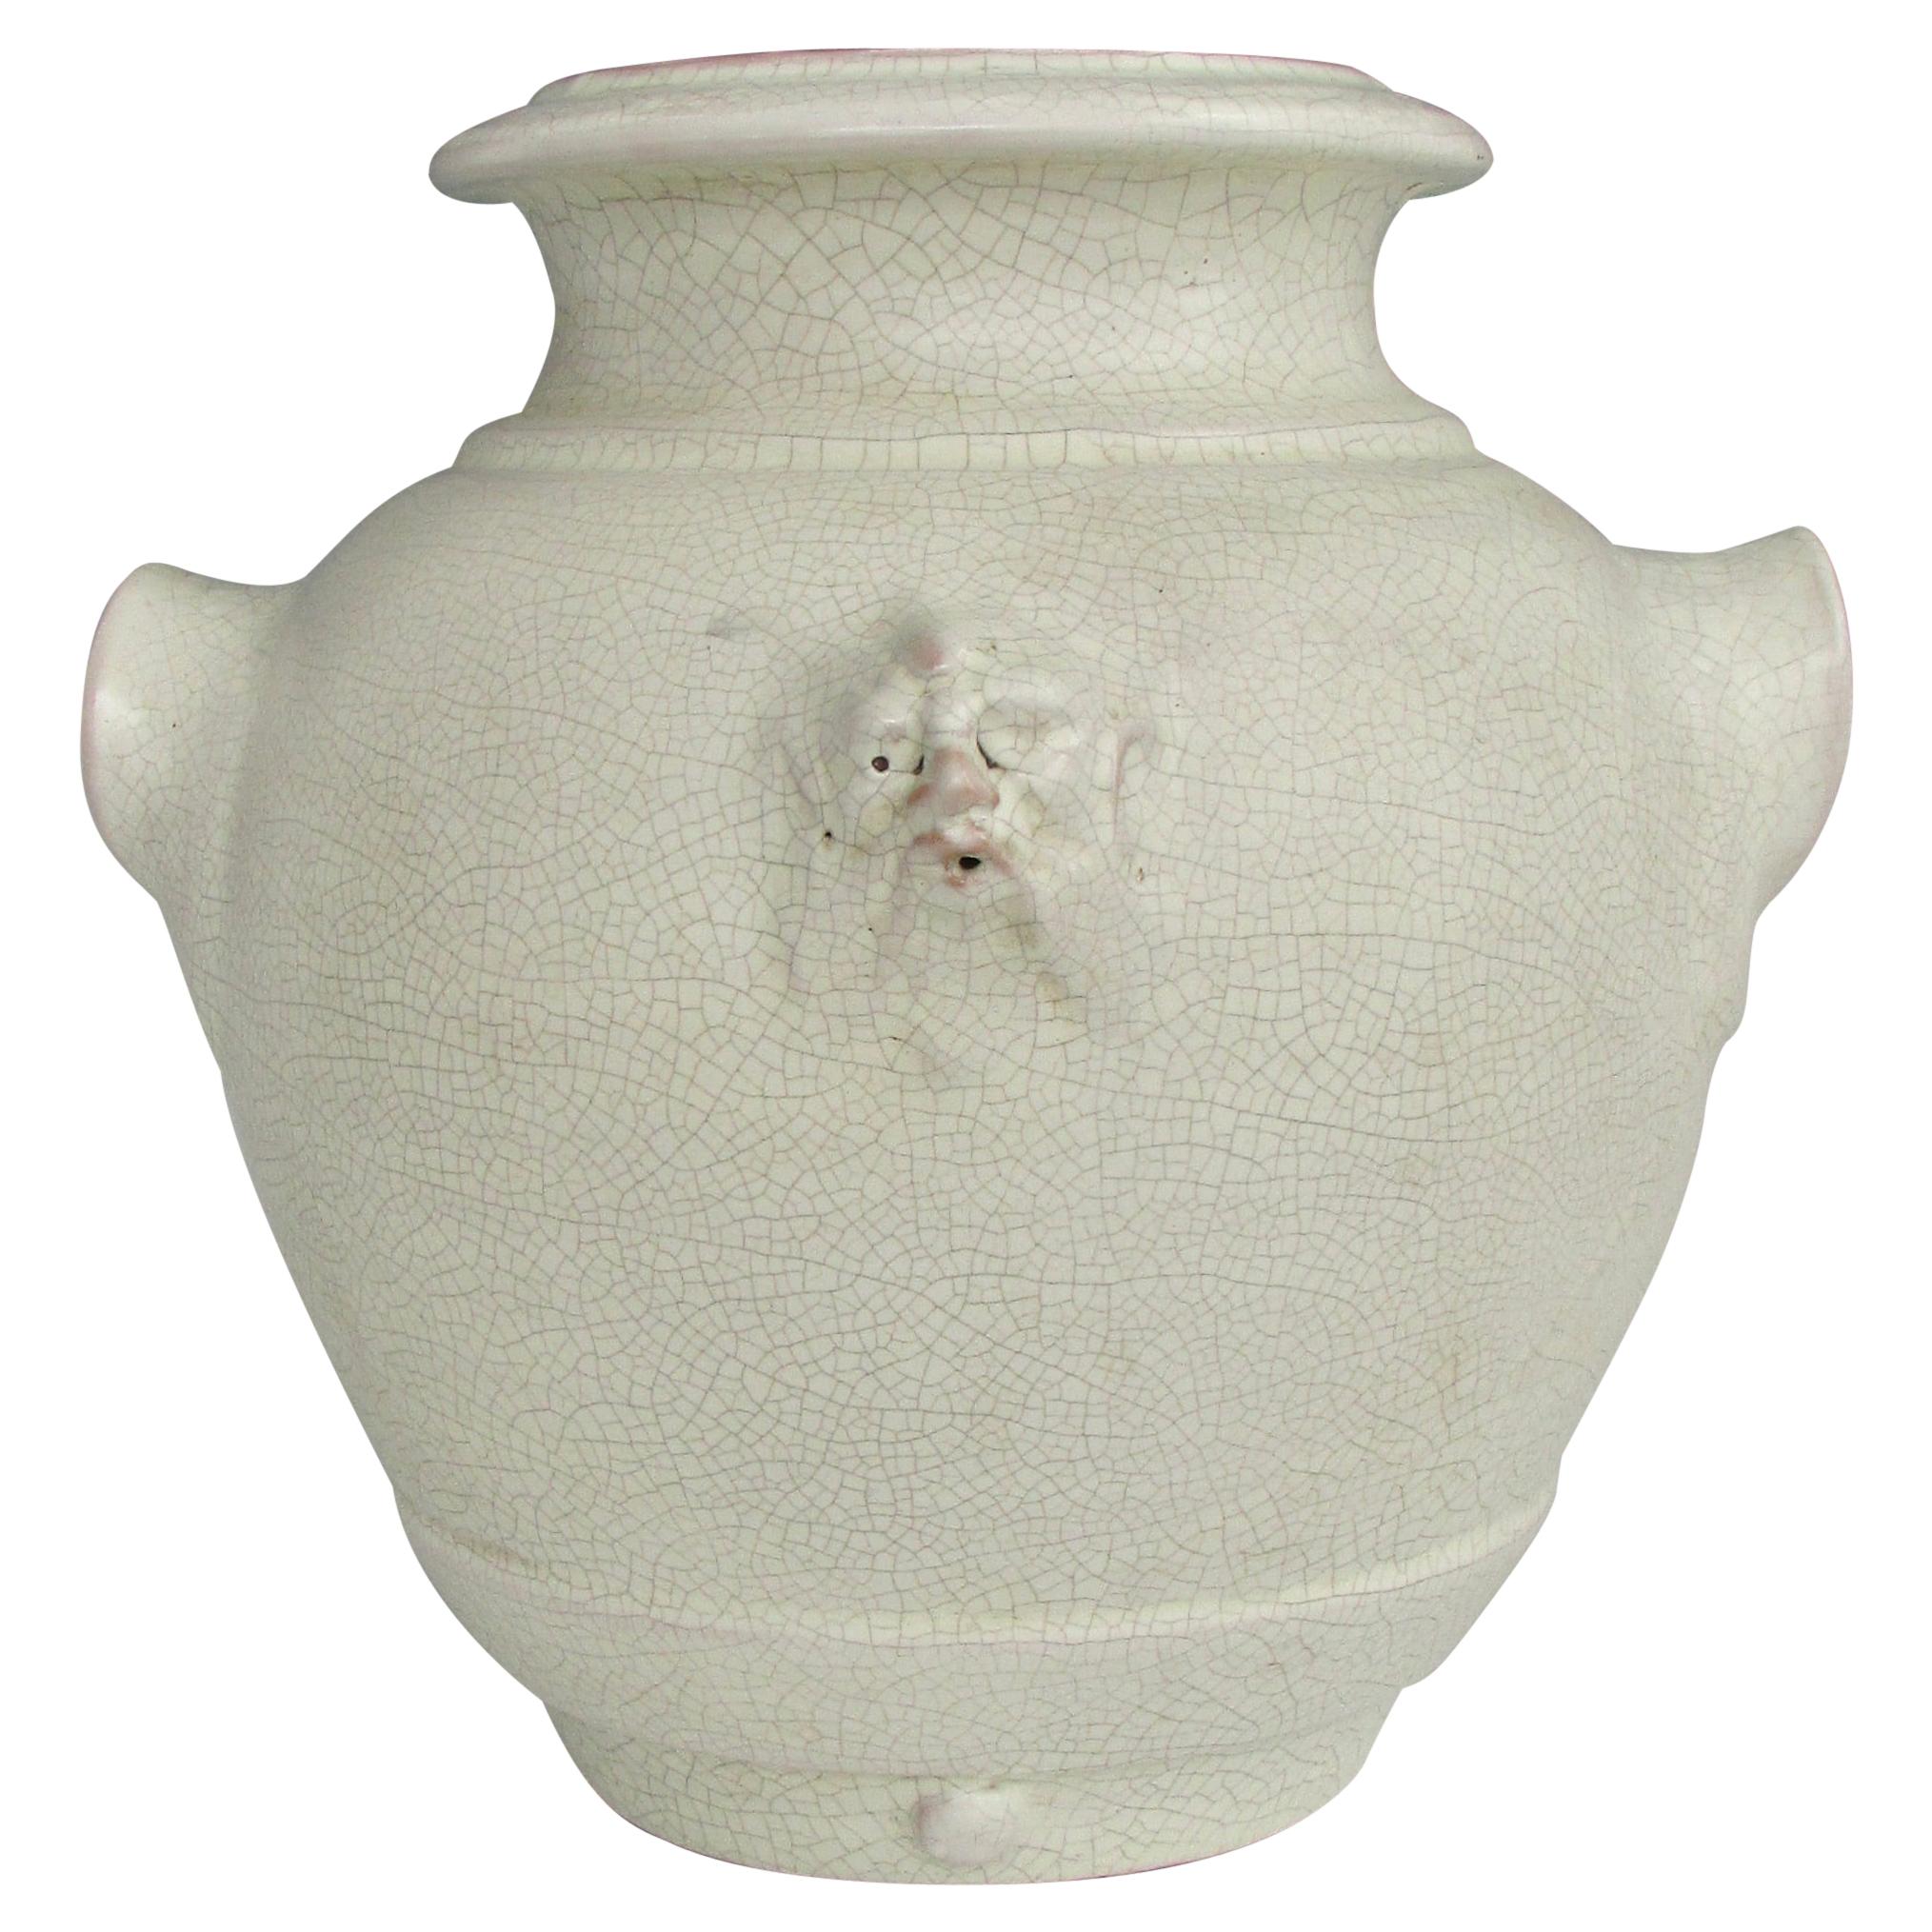 Crackle Glaze Italian Pottery Urn Marked Made in Italy for Tutto Bene, 1830